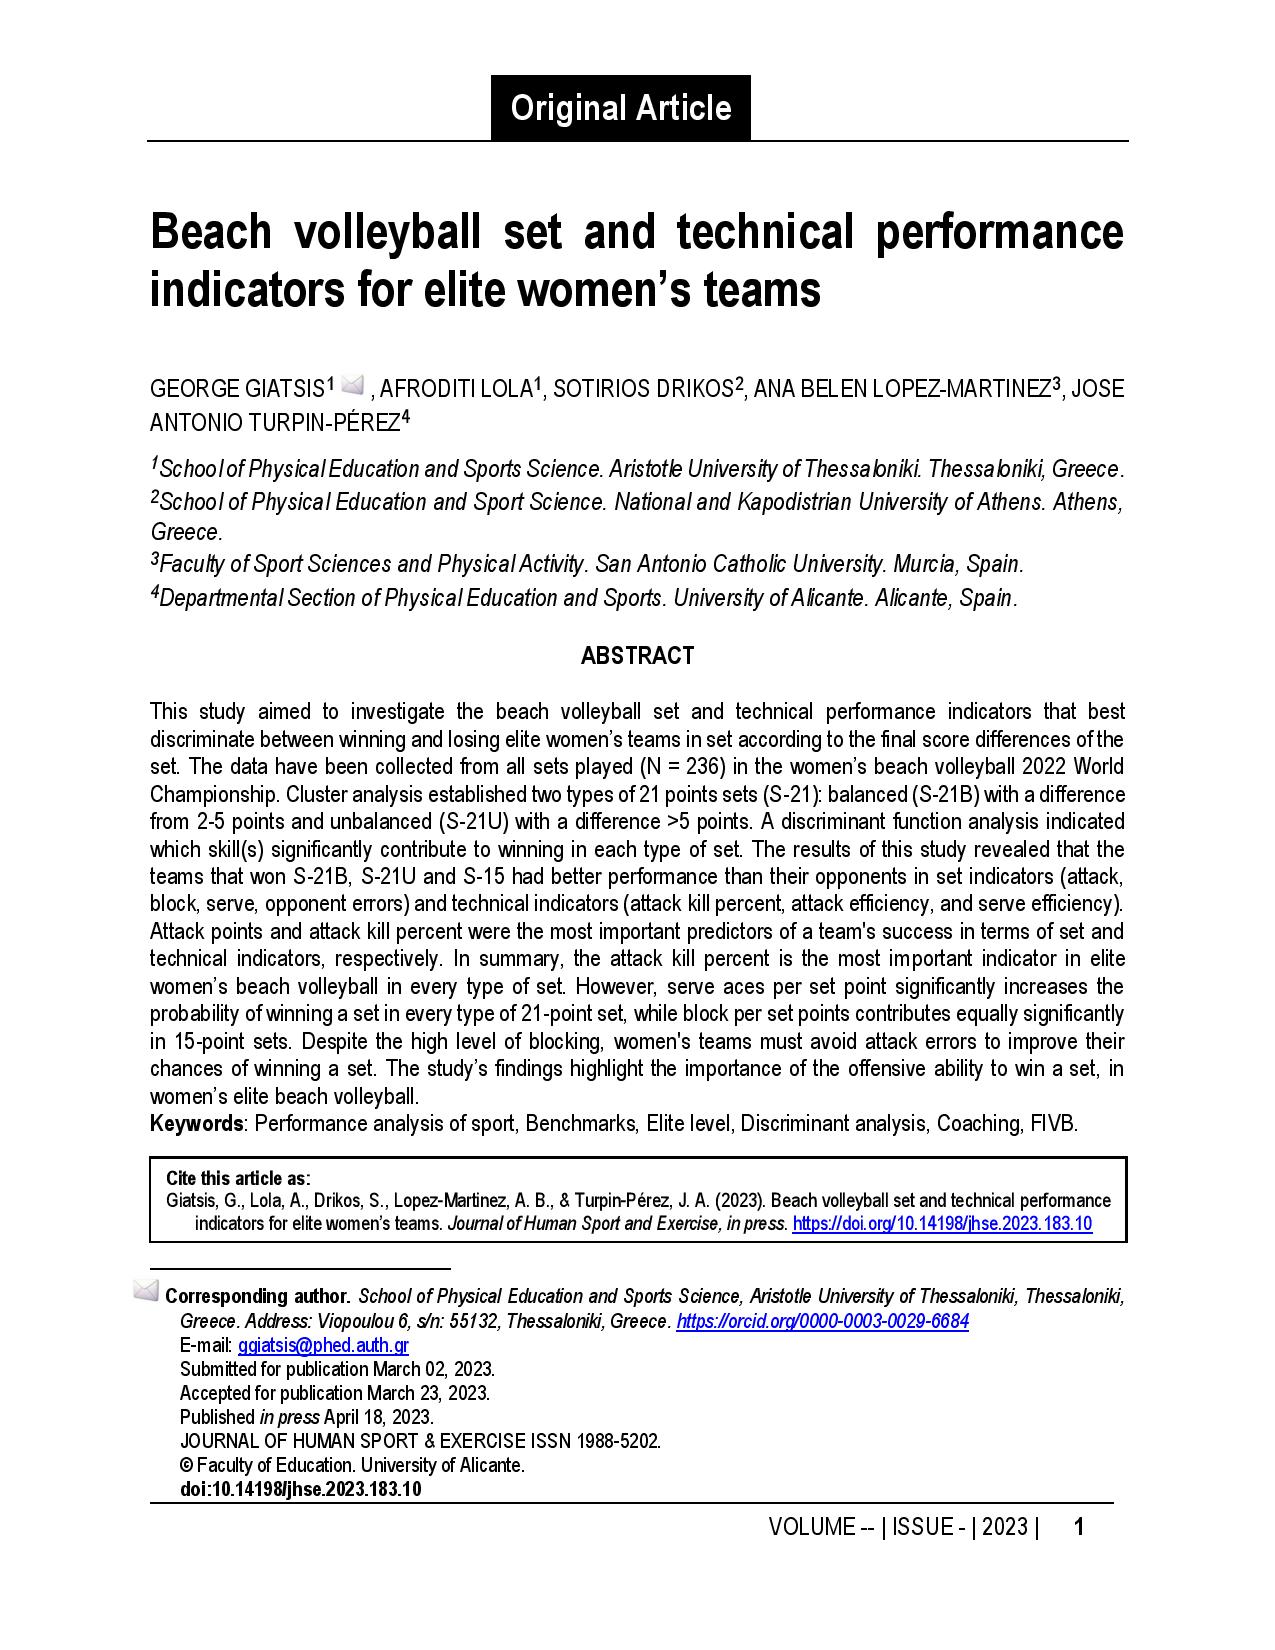 Beach volleyball set and technical performance indicators for elite women’s teams